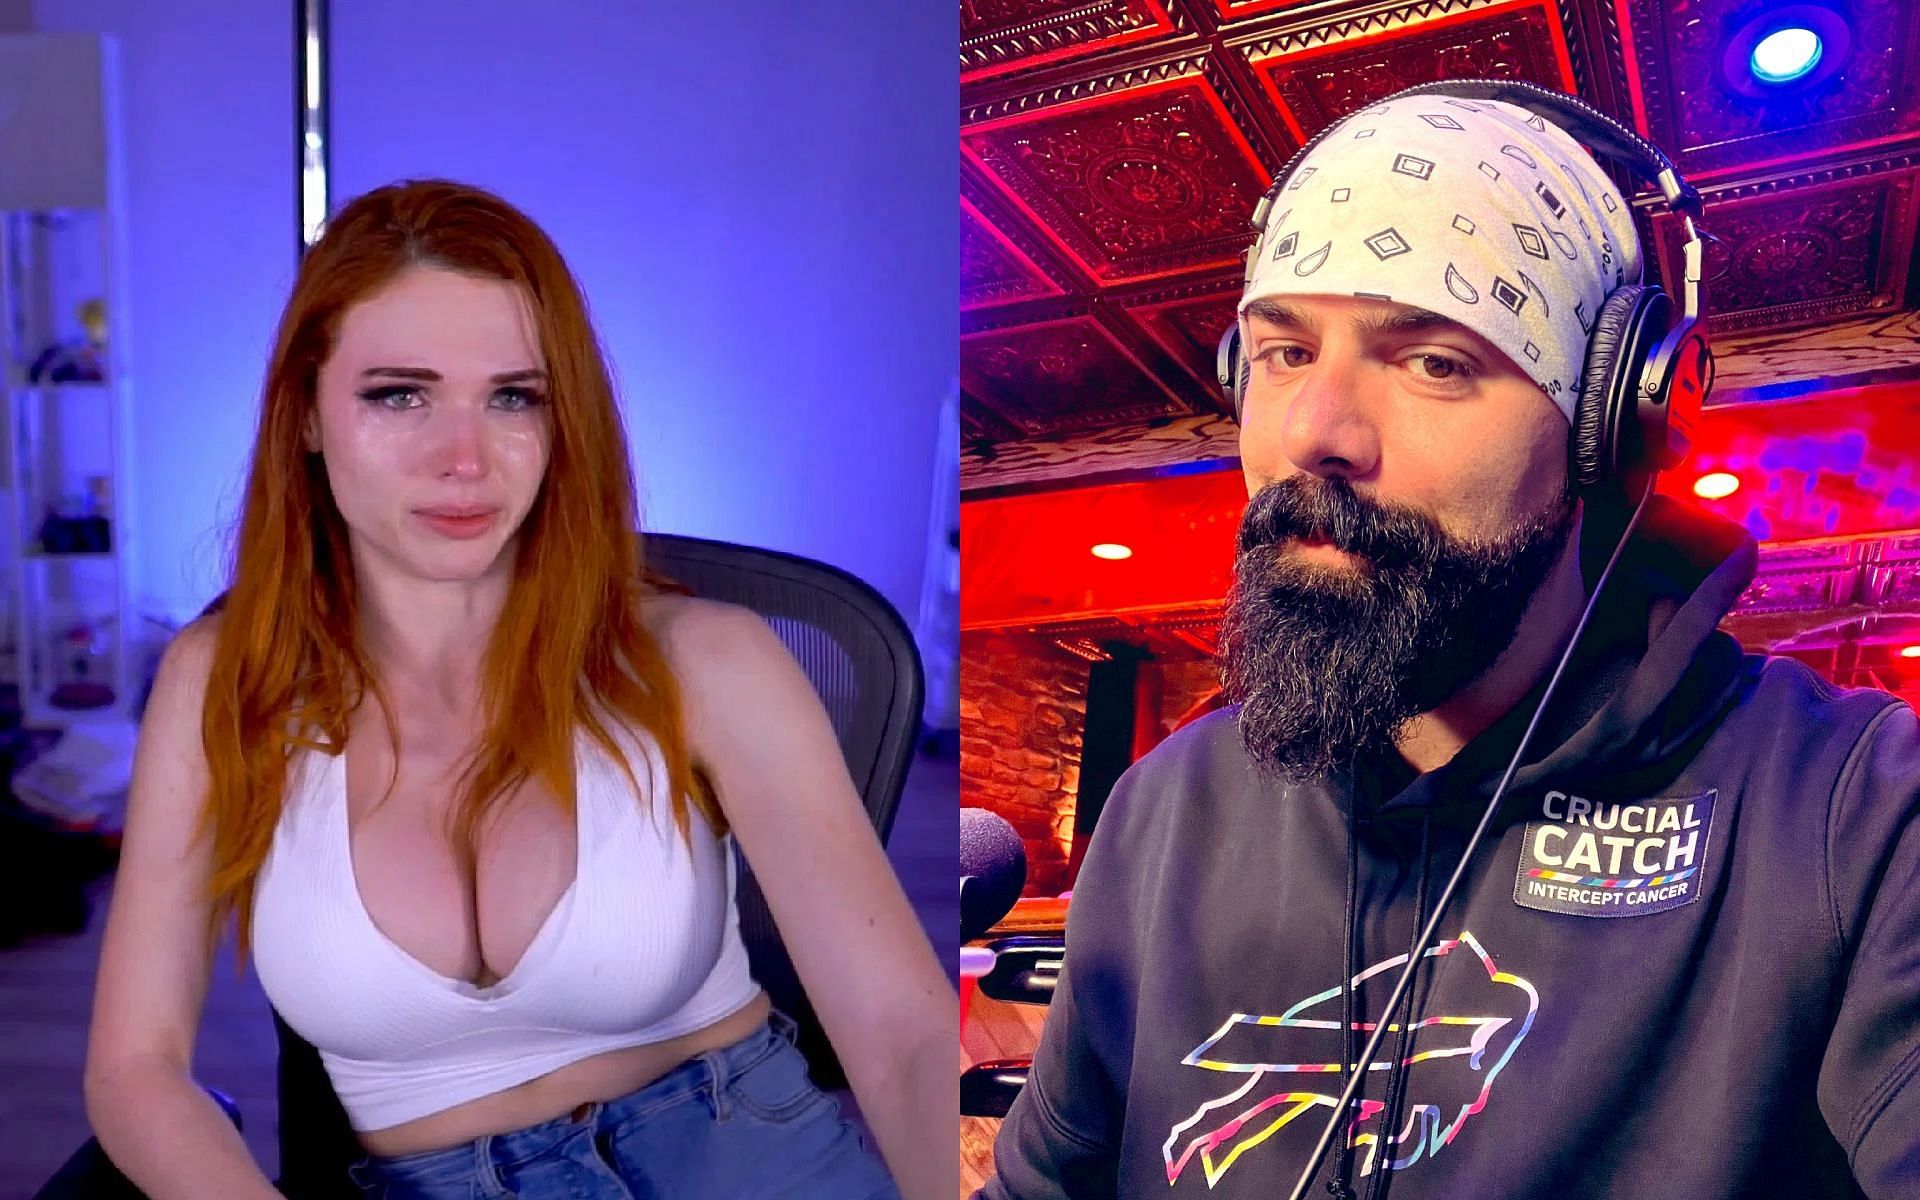 "Keemstar has to be one of the worst human beings to have a platform